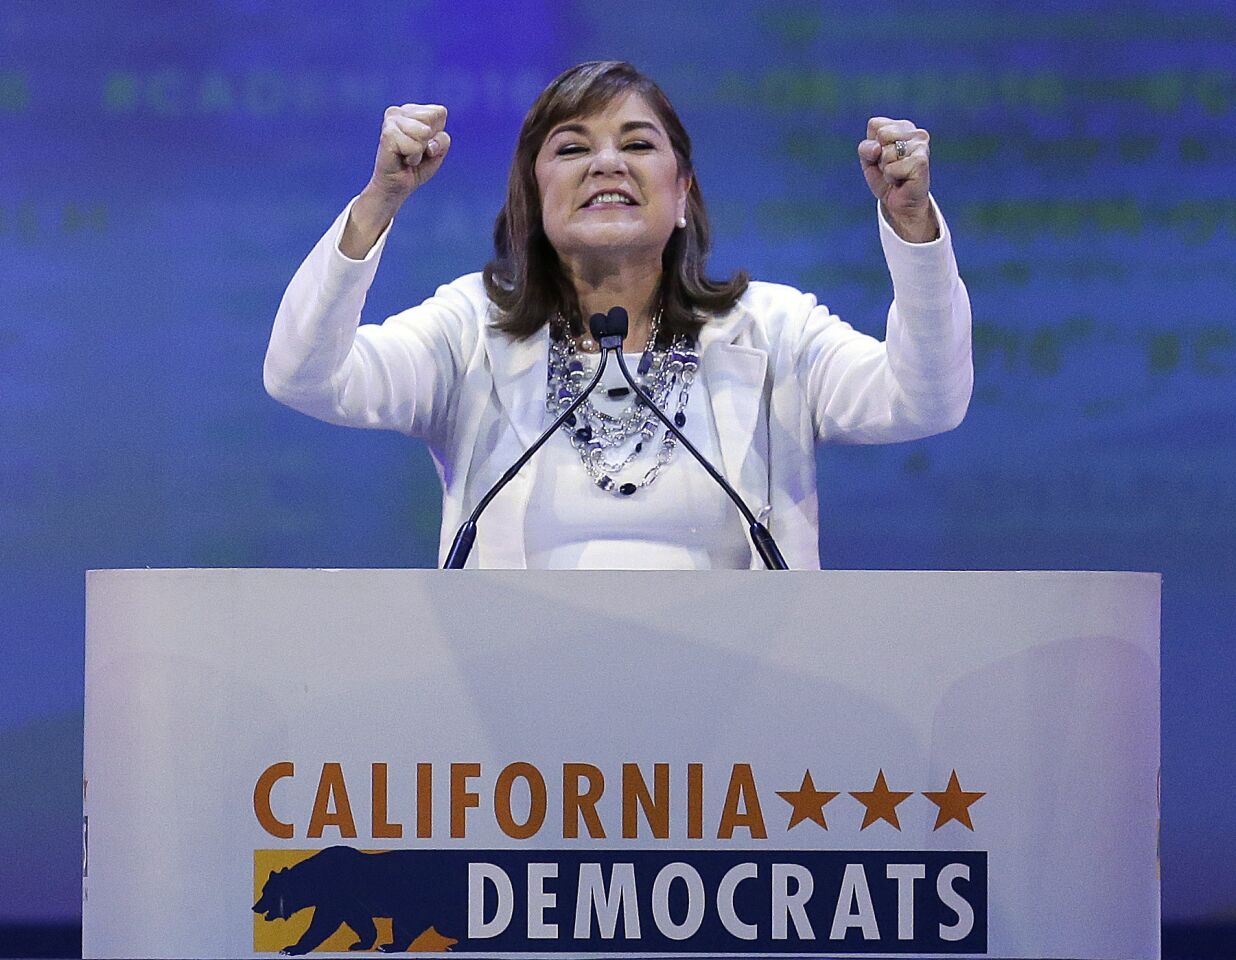 Rep. Loretta Sanchez, D-Santa Ana, gestures while speaking before the California Democratic Party Convention on Saturday in San Jose.